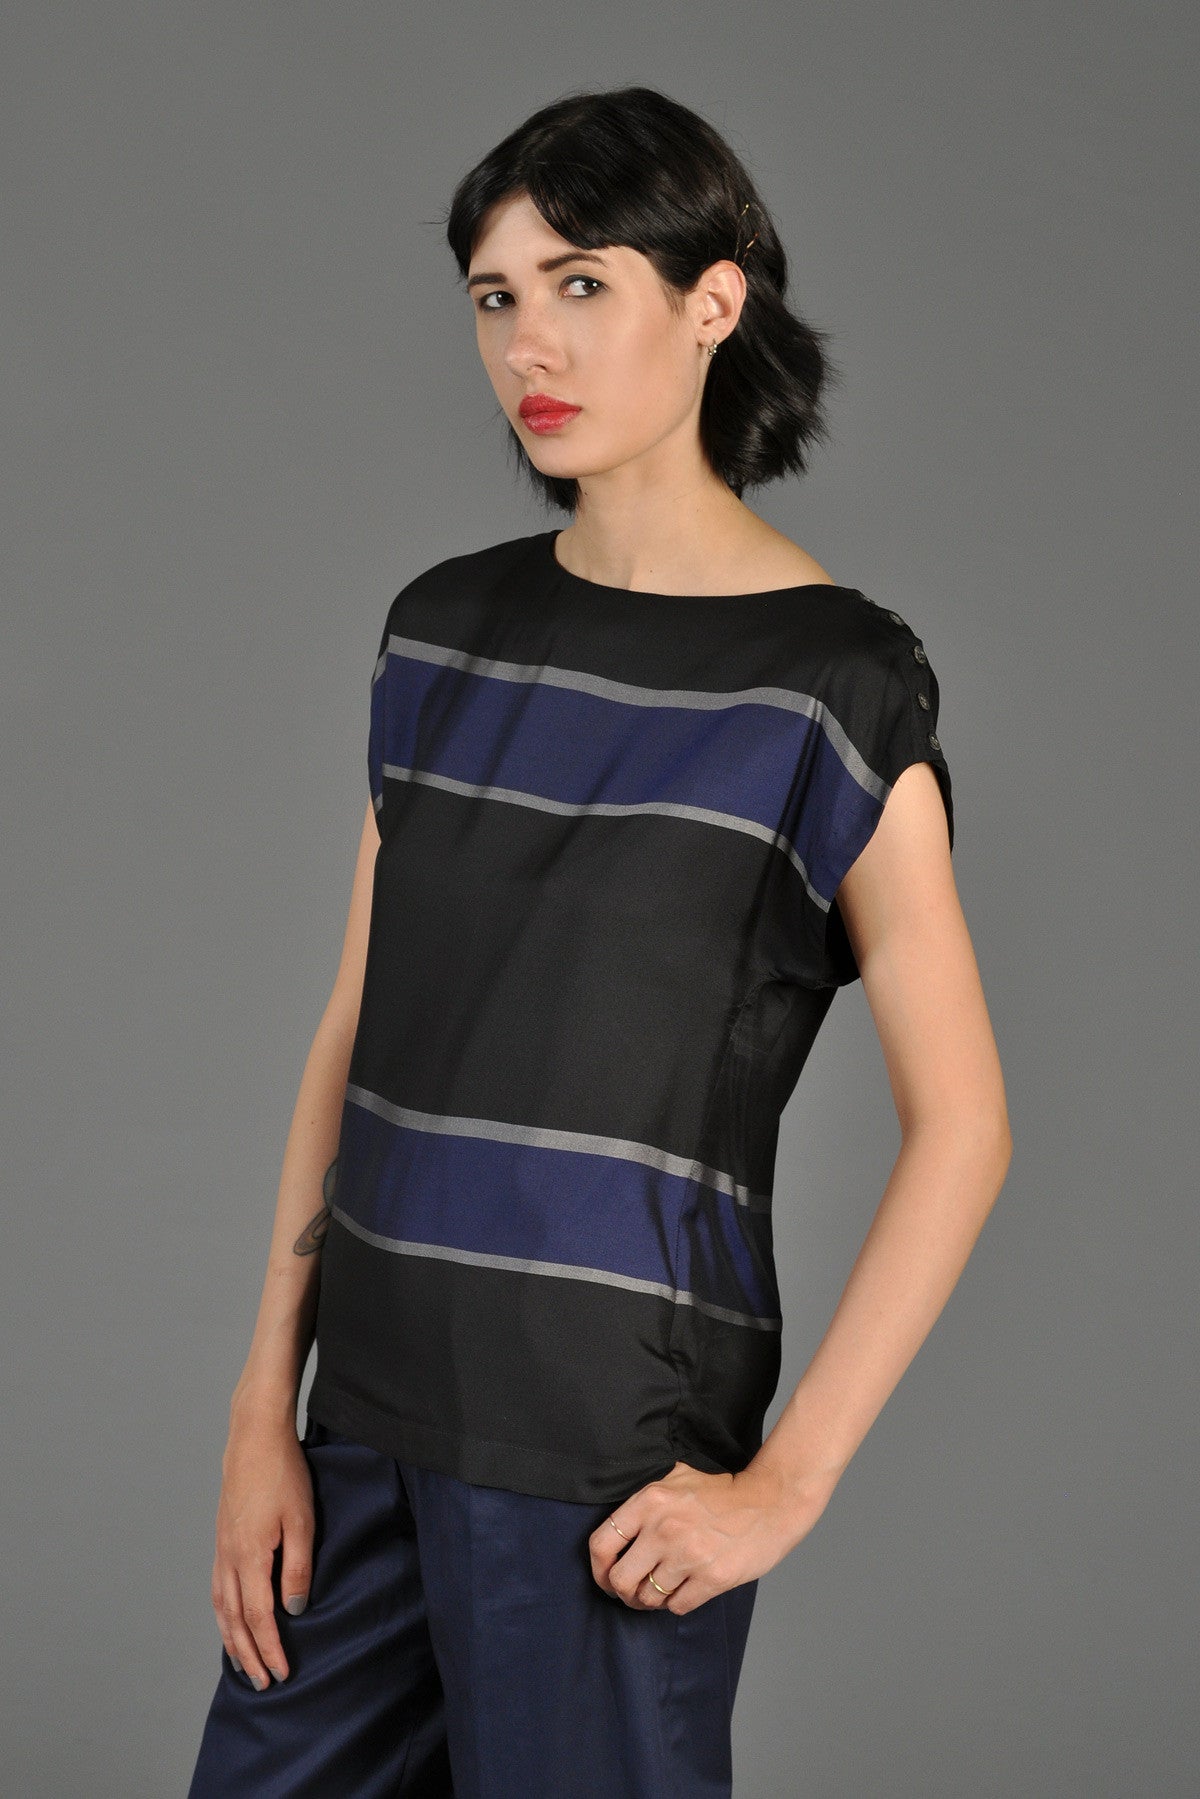 Perry Ellis 1980s Boxy Silk Top w/Buttoning Shoulders | BUSTOWN MODERN